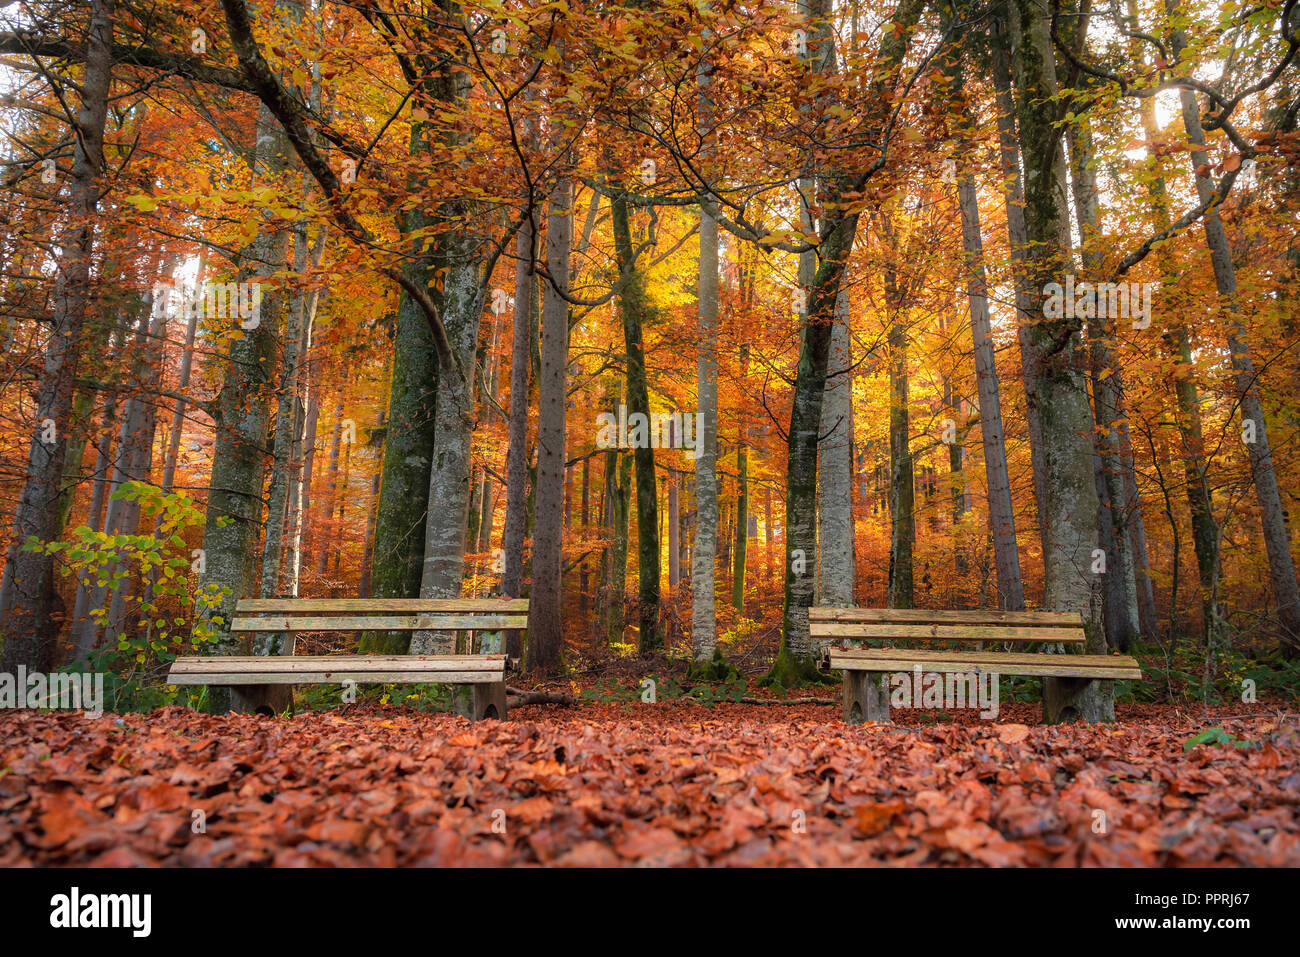 Fall scenery with two wooden benches on a  carpet of autumn leaves, in a colorful deciduous forest, near Fussen, Bavaria, Germany. Stock Photo